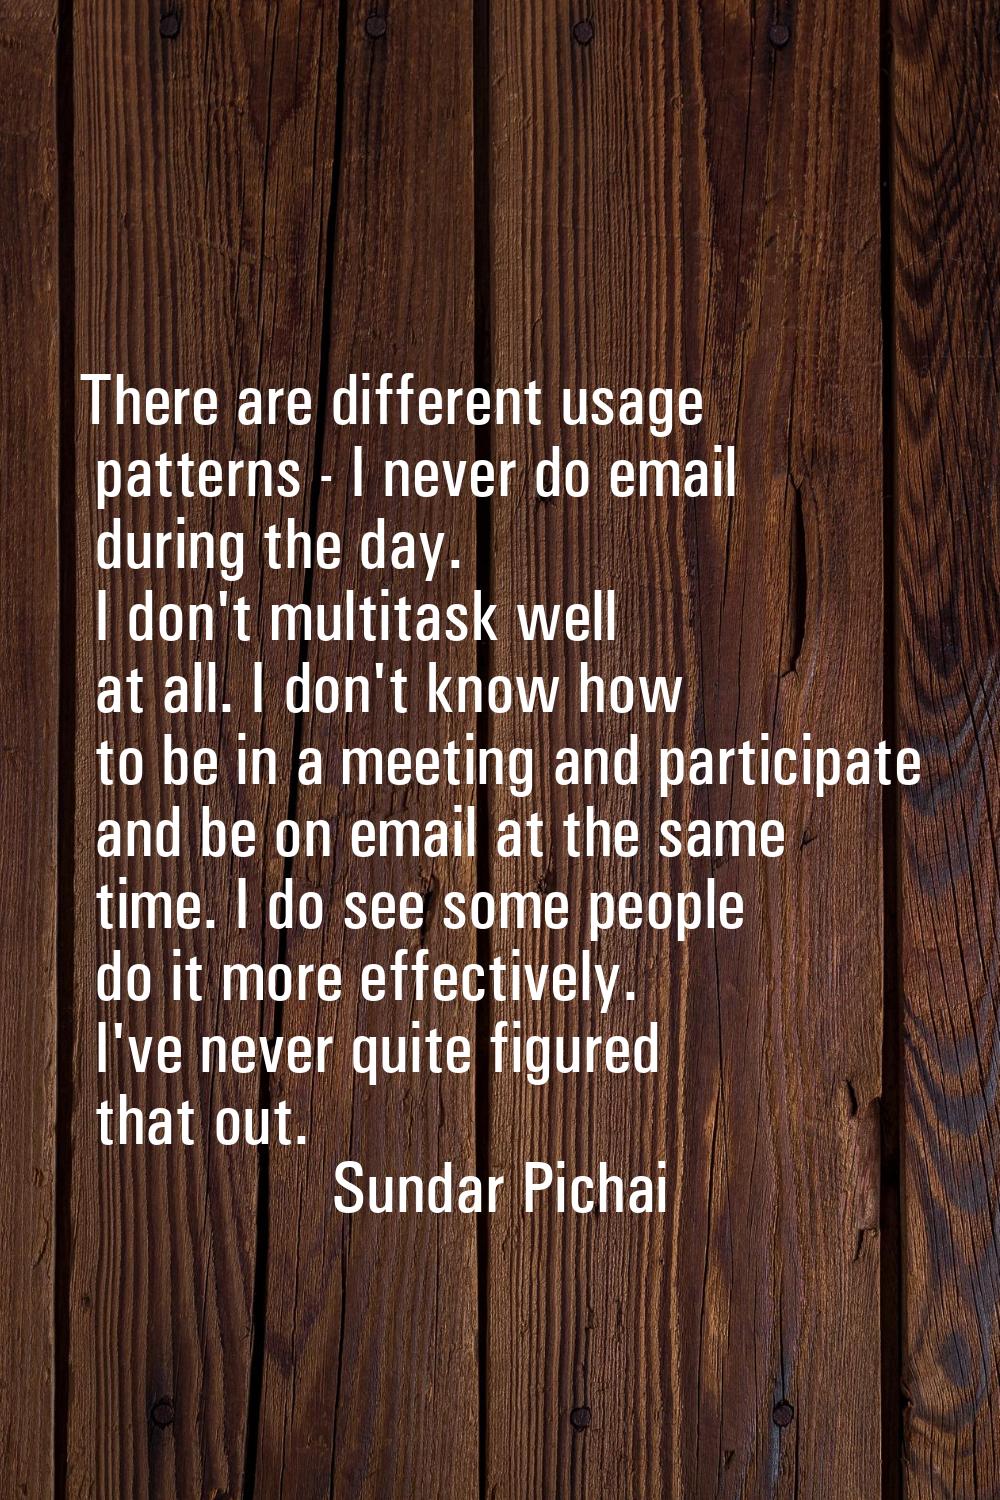 There are different usage patterns - I never do email during the day. I don't multitask well at all